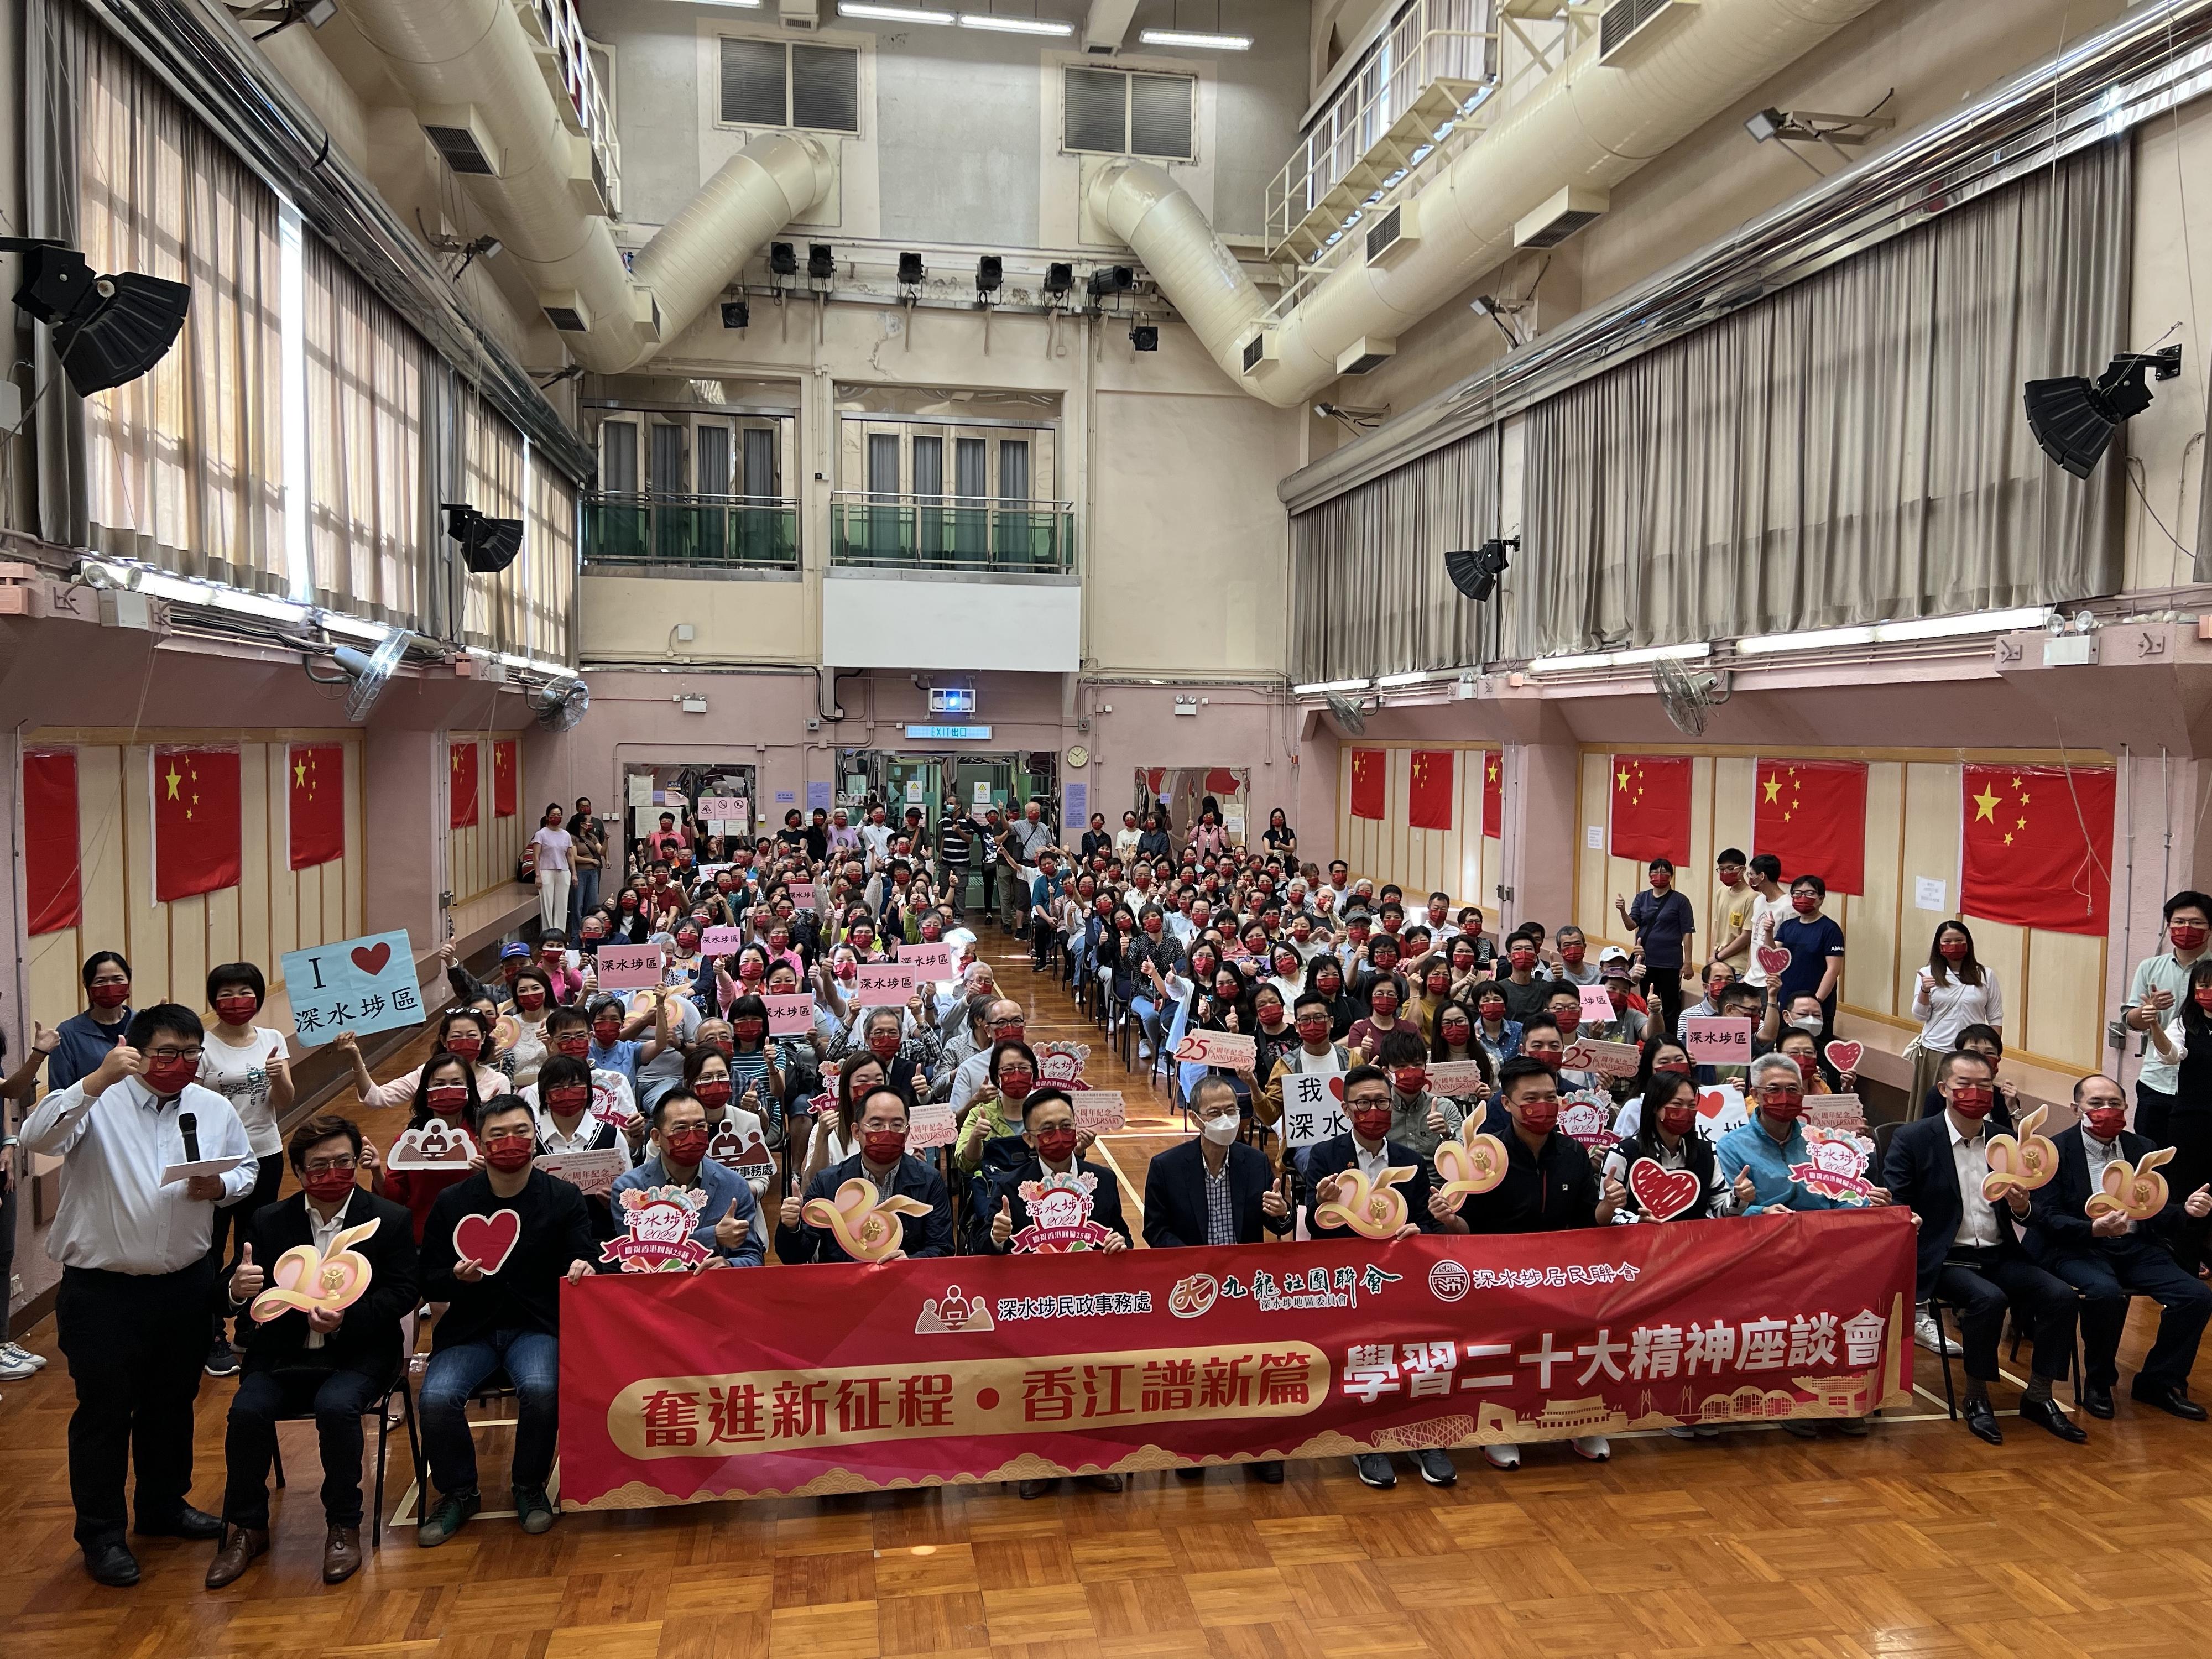 The Sham Shui Po District Office (SSPDO), together with the Kowloon Federation of Associations Sham Shui Po District Committee and the Sham Shui Po Residents Association, held a study session on "Spirit of the 20th National Congress of the Communist Party of China" at Shek Kip Mei Community Hall yesterday (October 30). Photo shows members of the committees formed by the SSPDO, leaders of district bodies as well as local residents at the session.